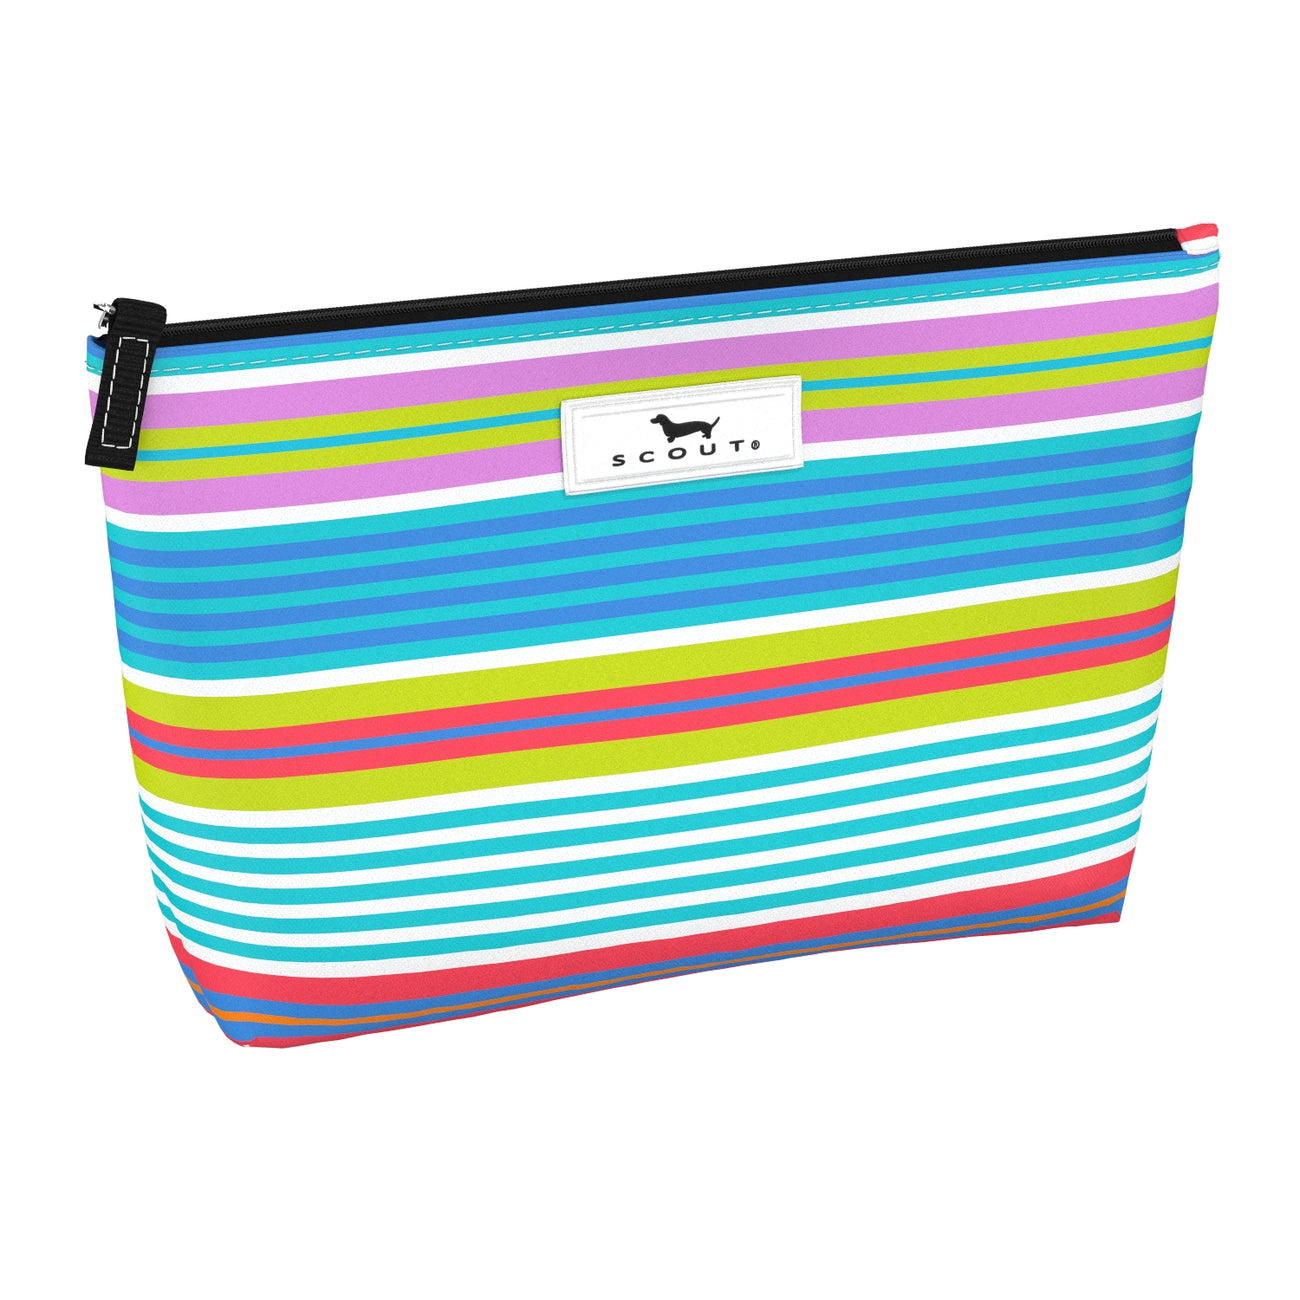 Fruit of Tulum Twiggy Makeup Bag by Scout